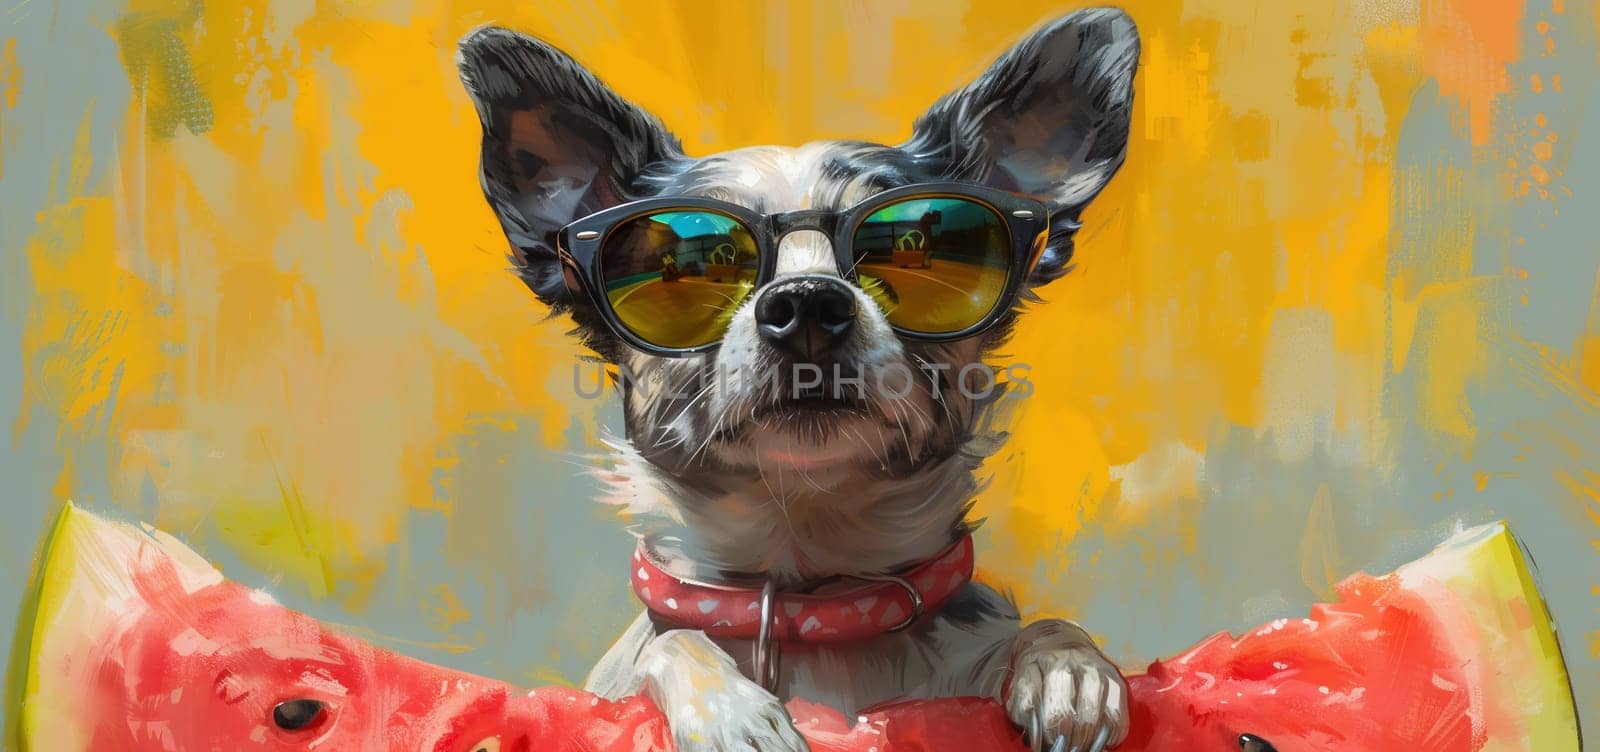 Smiling puppy wearing sunglasses holds a watermelon. High quality photo